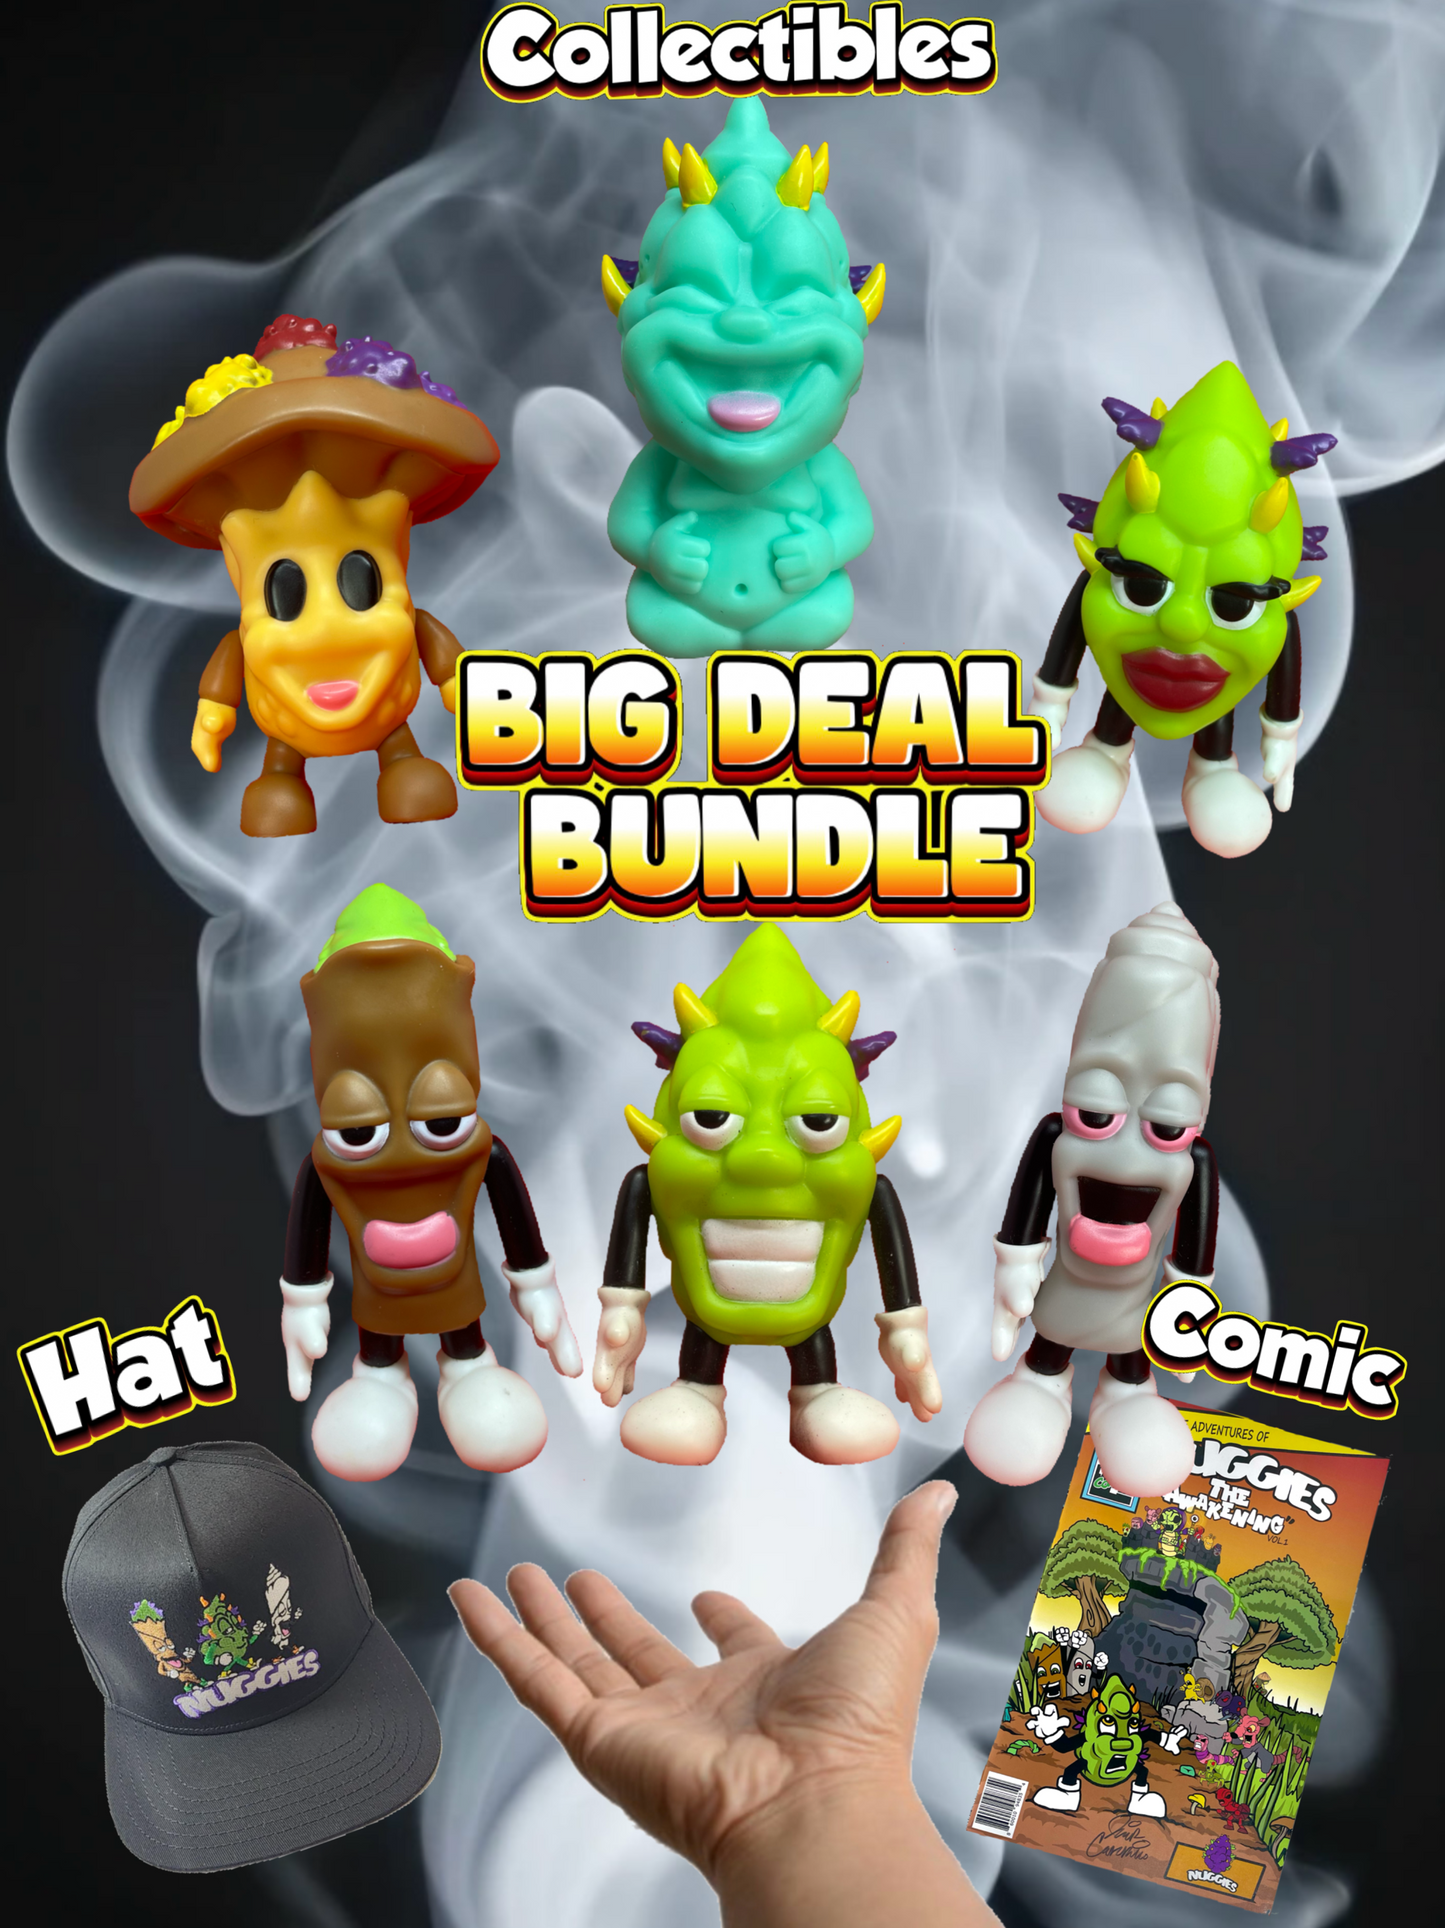 Big Deal Bundle- 6 Collectibles + comic + embroidered hat